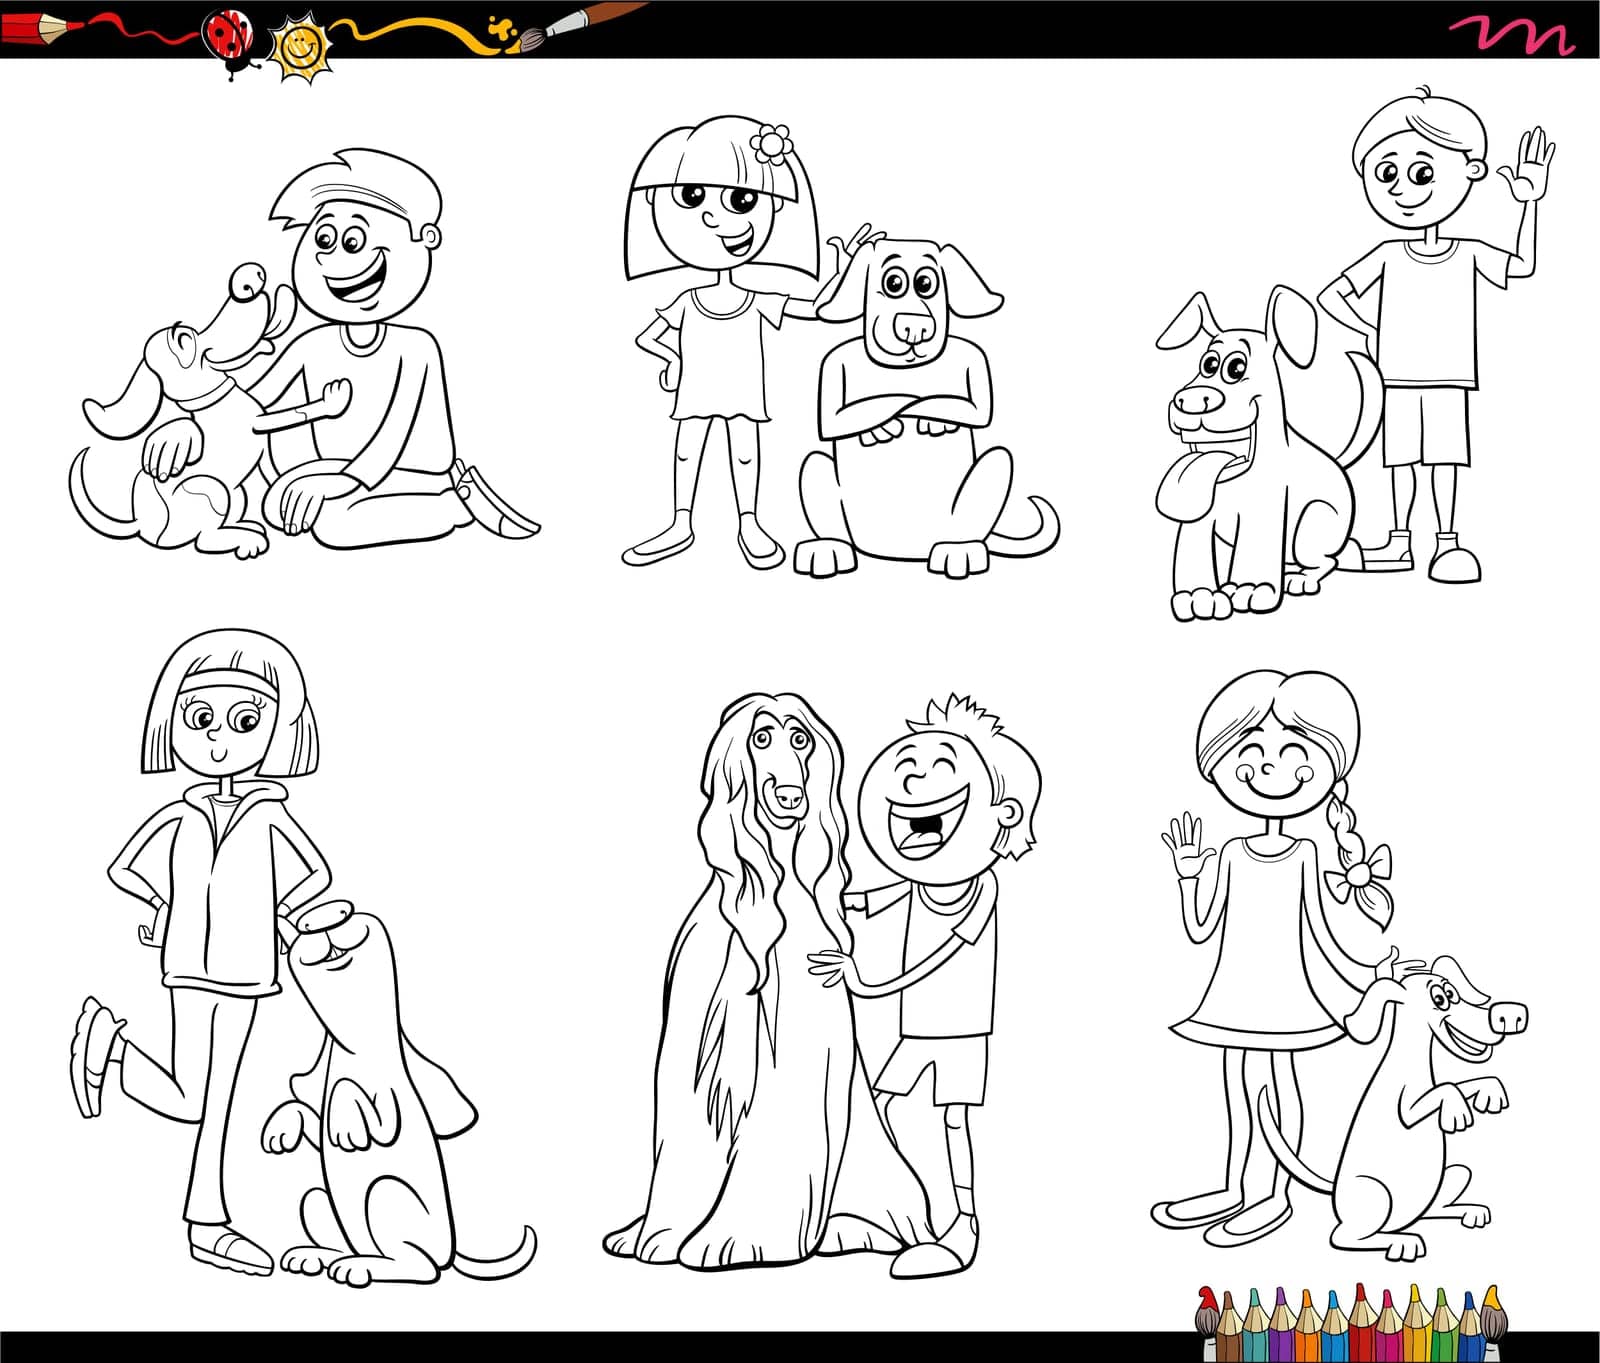 cartoon children and dogs characters set coloring page by izakowski